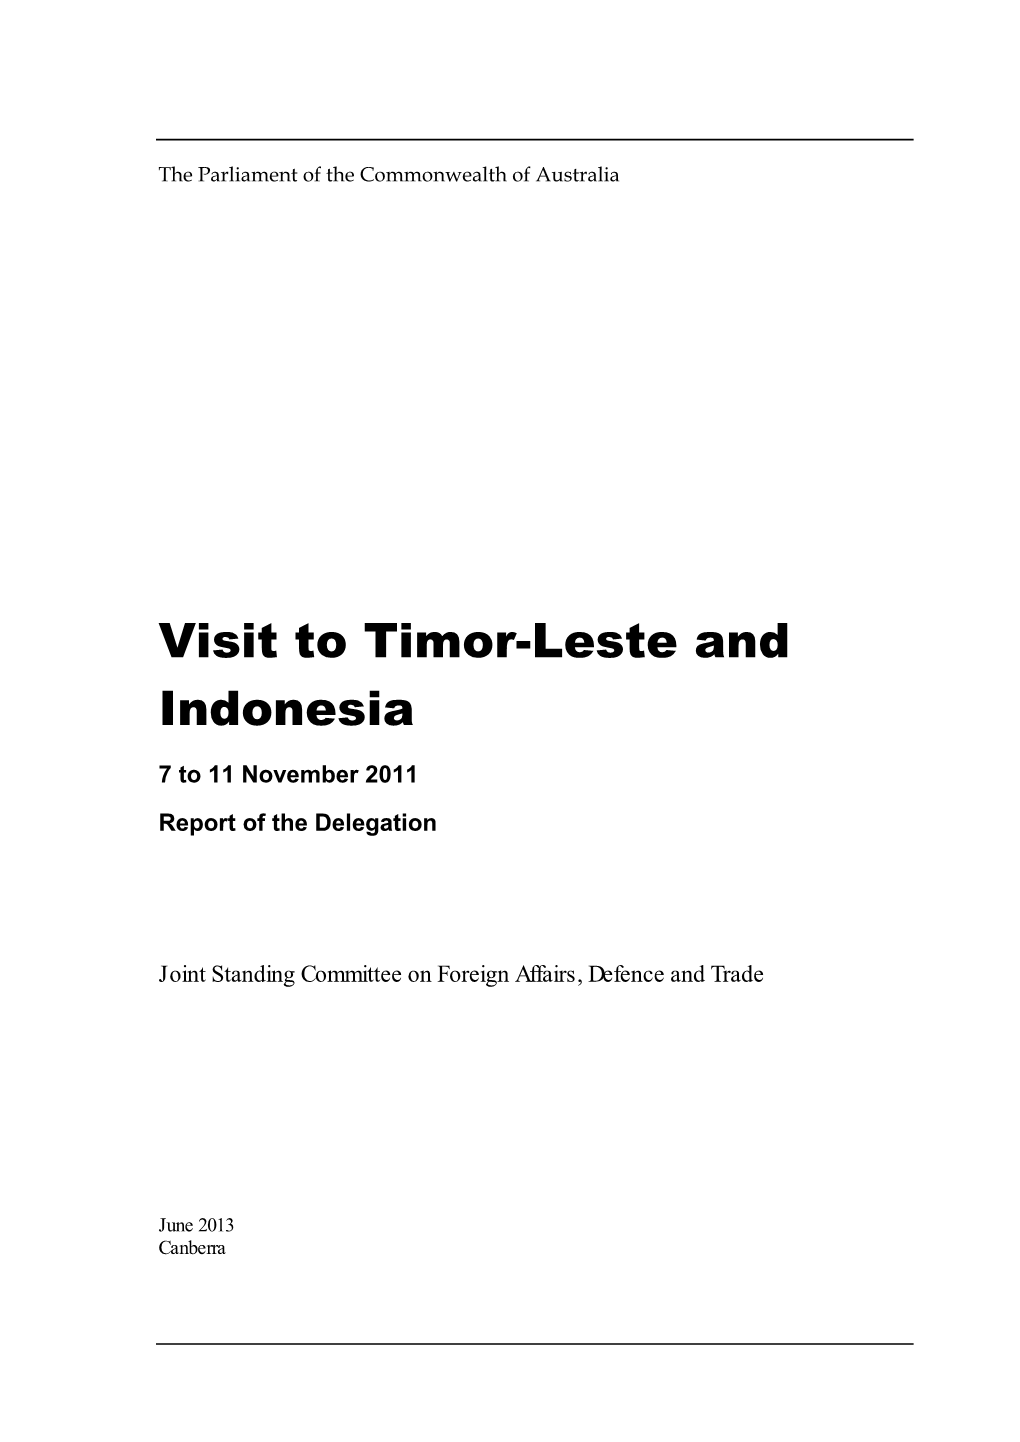 Visit to Timor-Leste and Indonesia